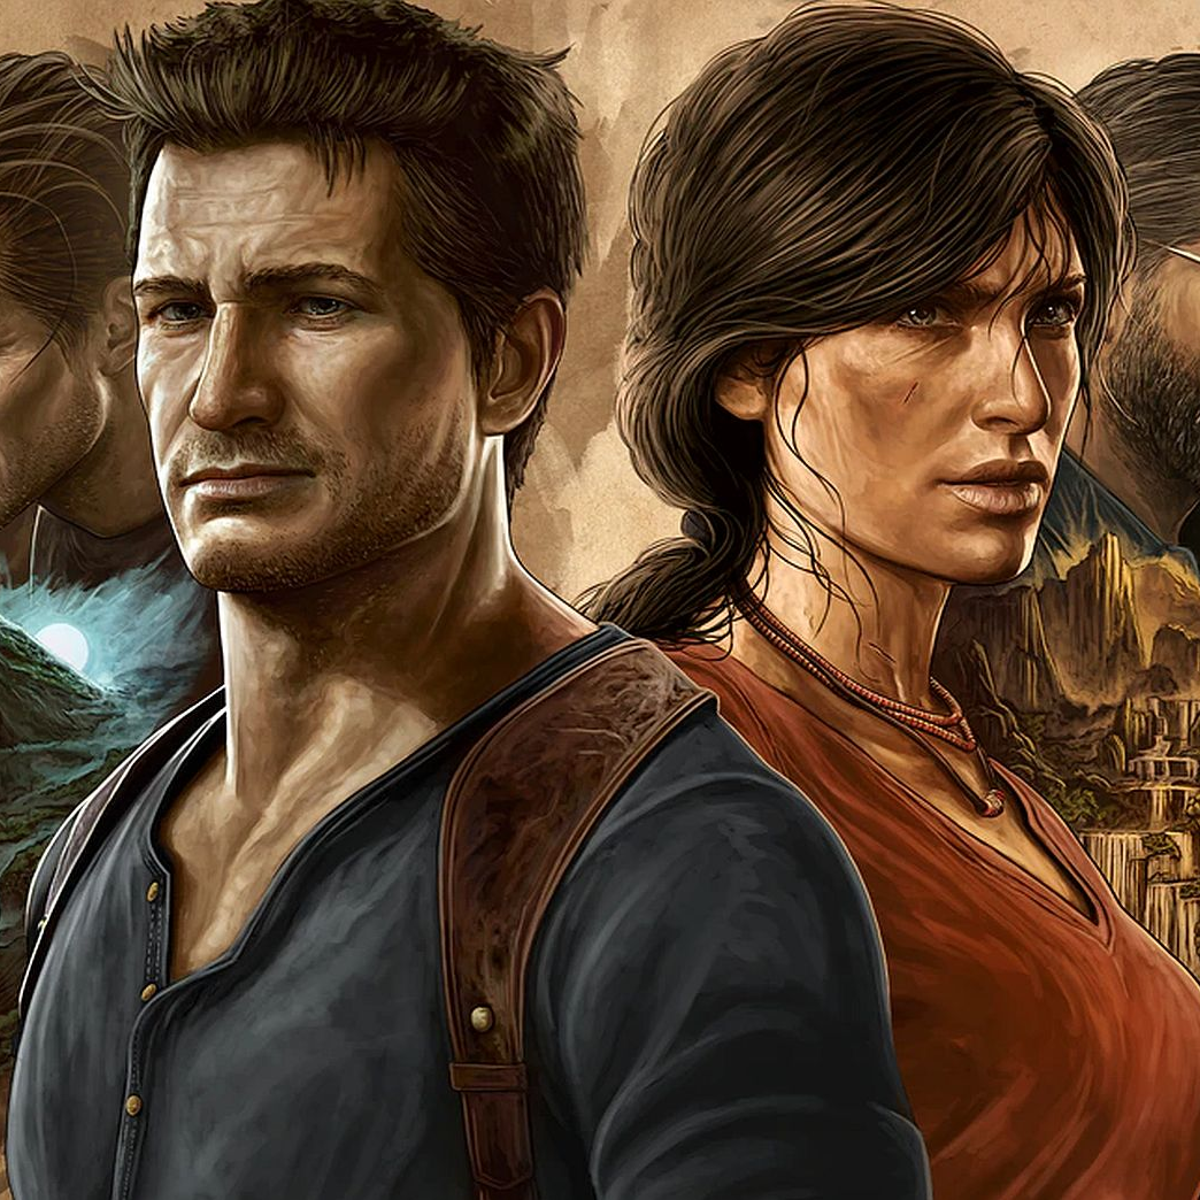 Here's What Critics Are Saying About 'Uncharted: The Lost Legacy